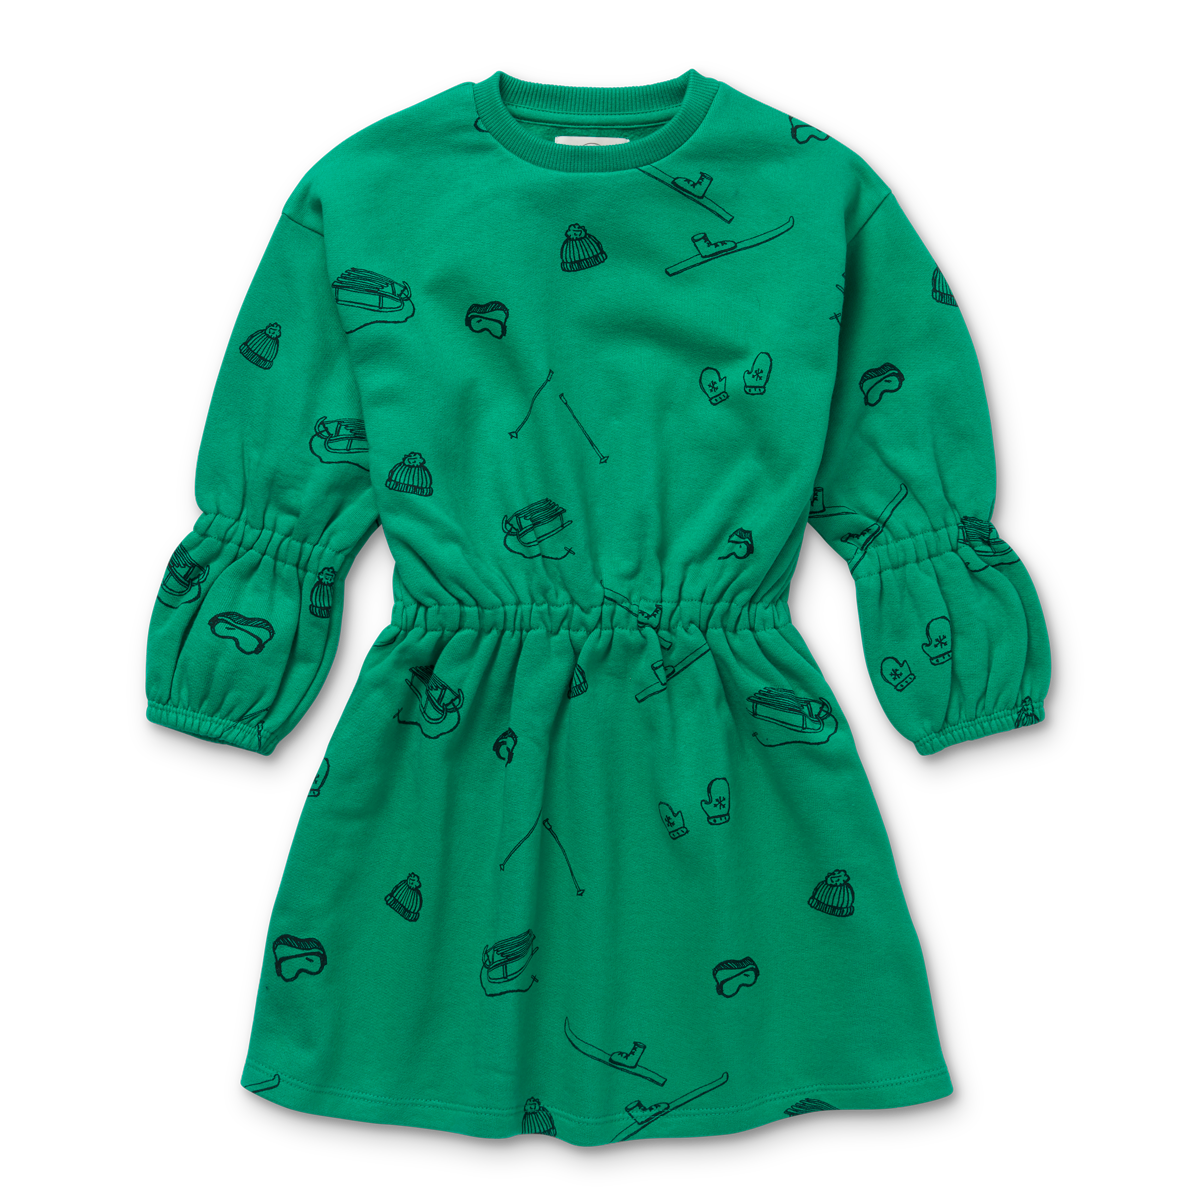 Sproet and Sprout Teal Ski Print Sweatdress